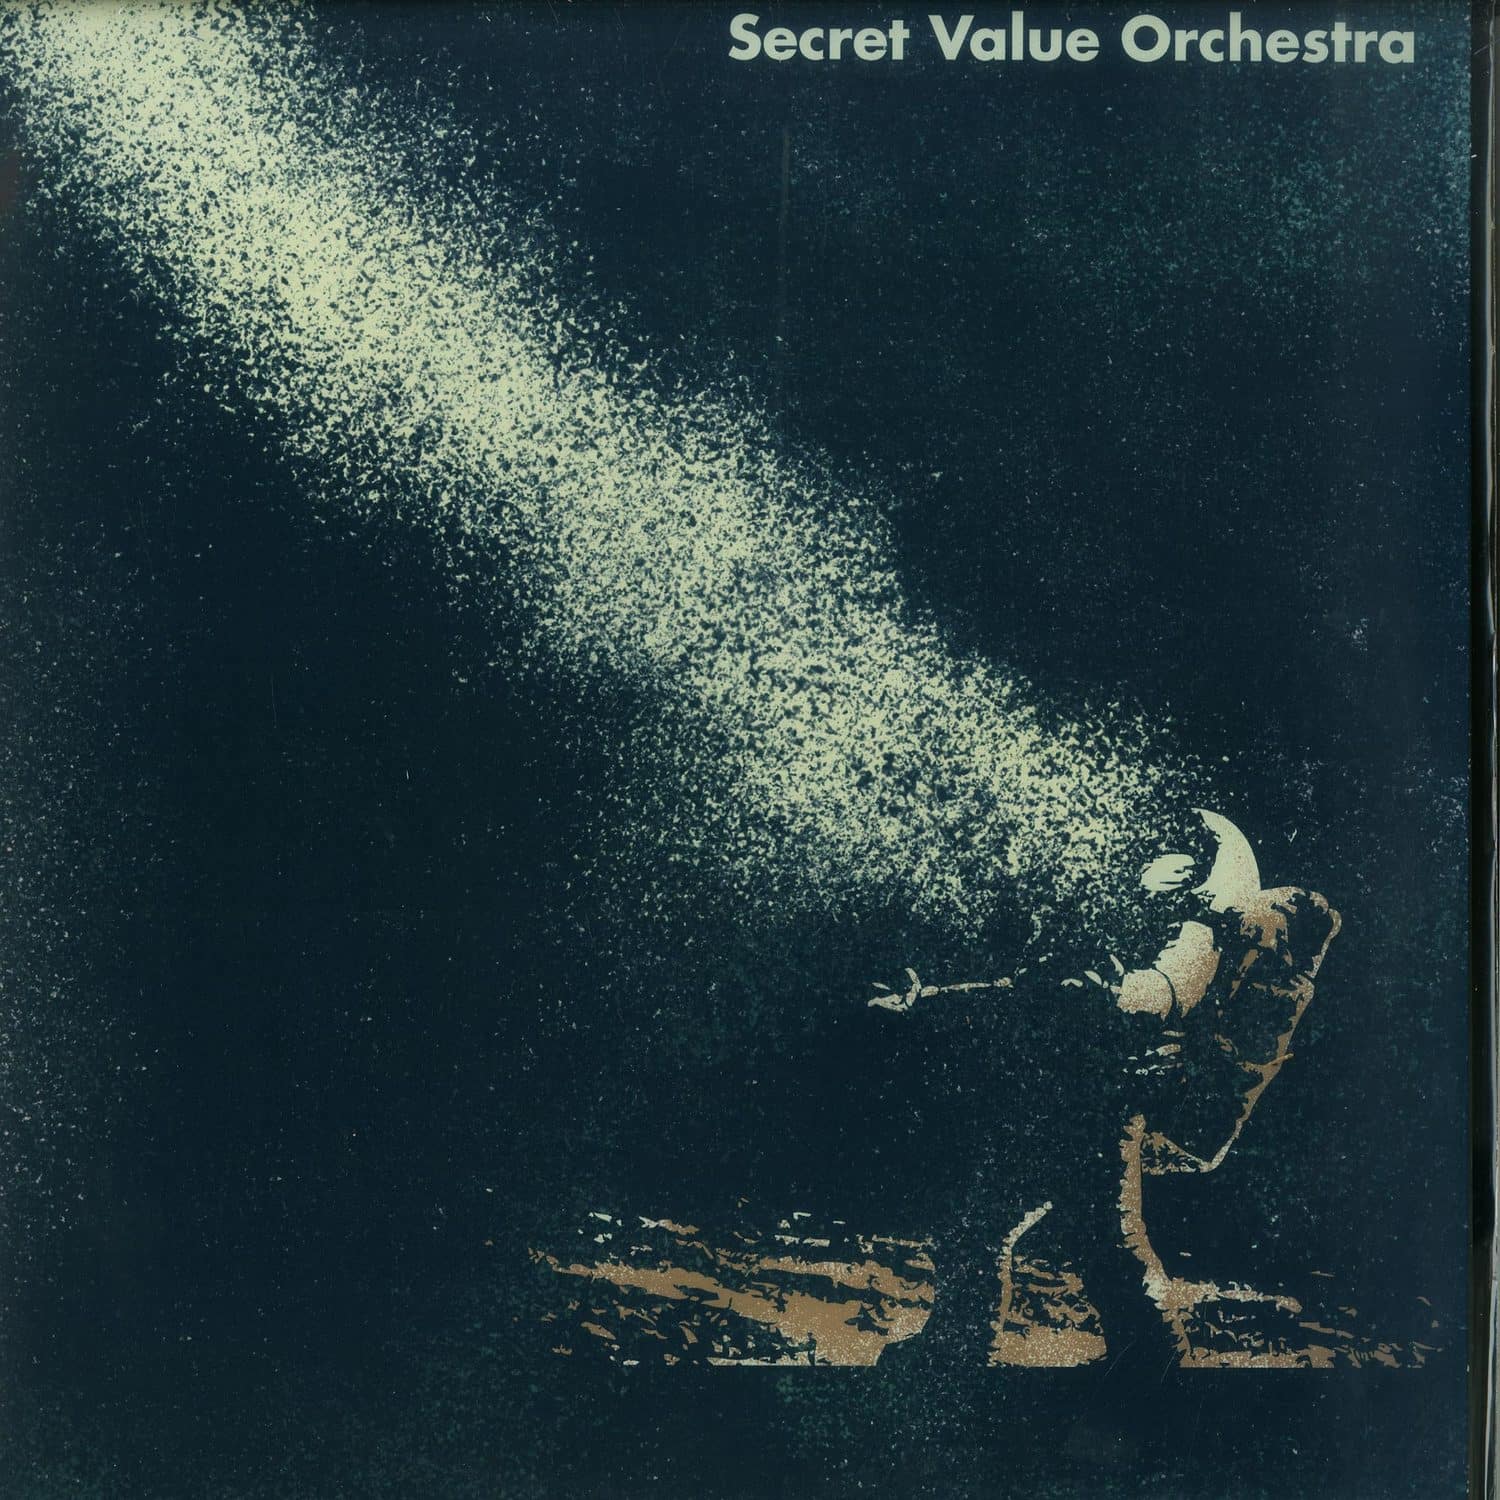 Secret Value Orchestra - UNIDENTIFIED FLYING OBJECT 